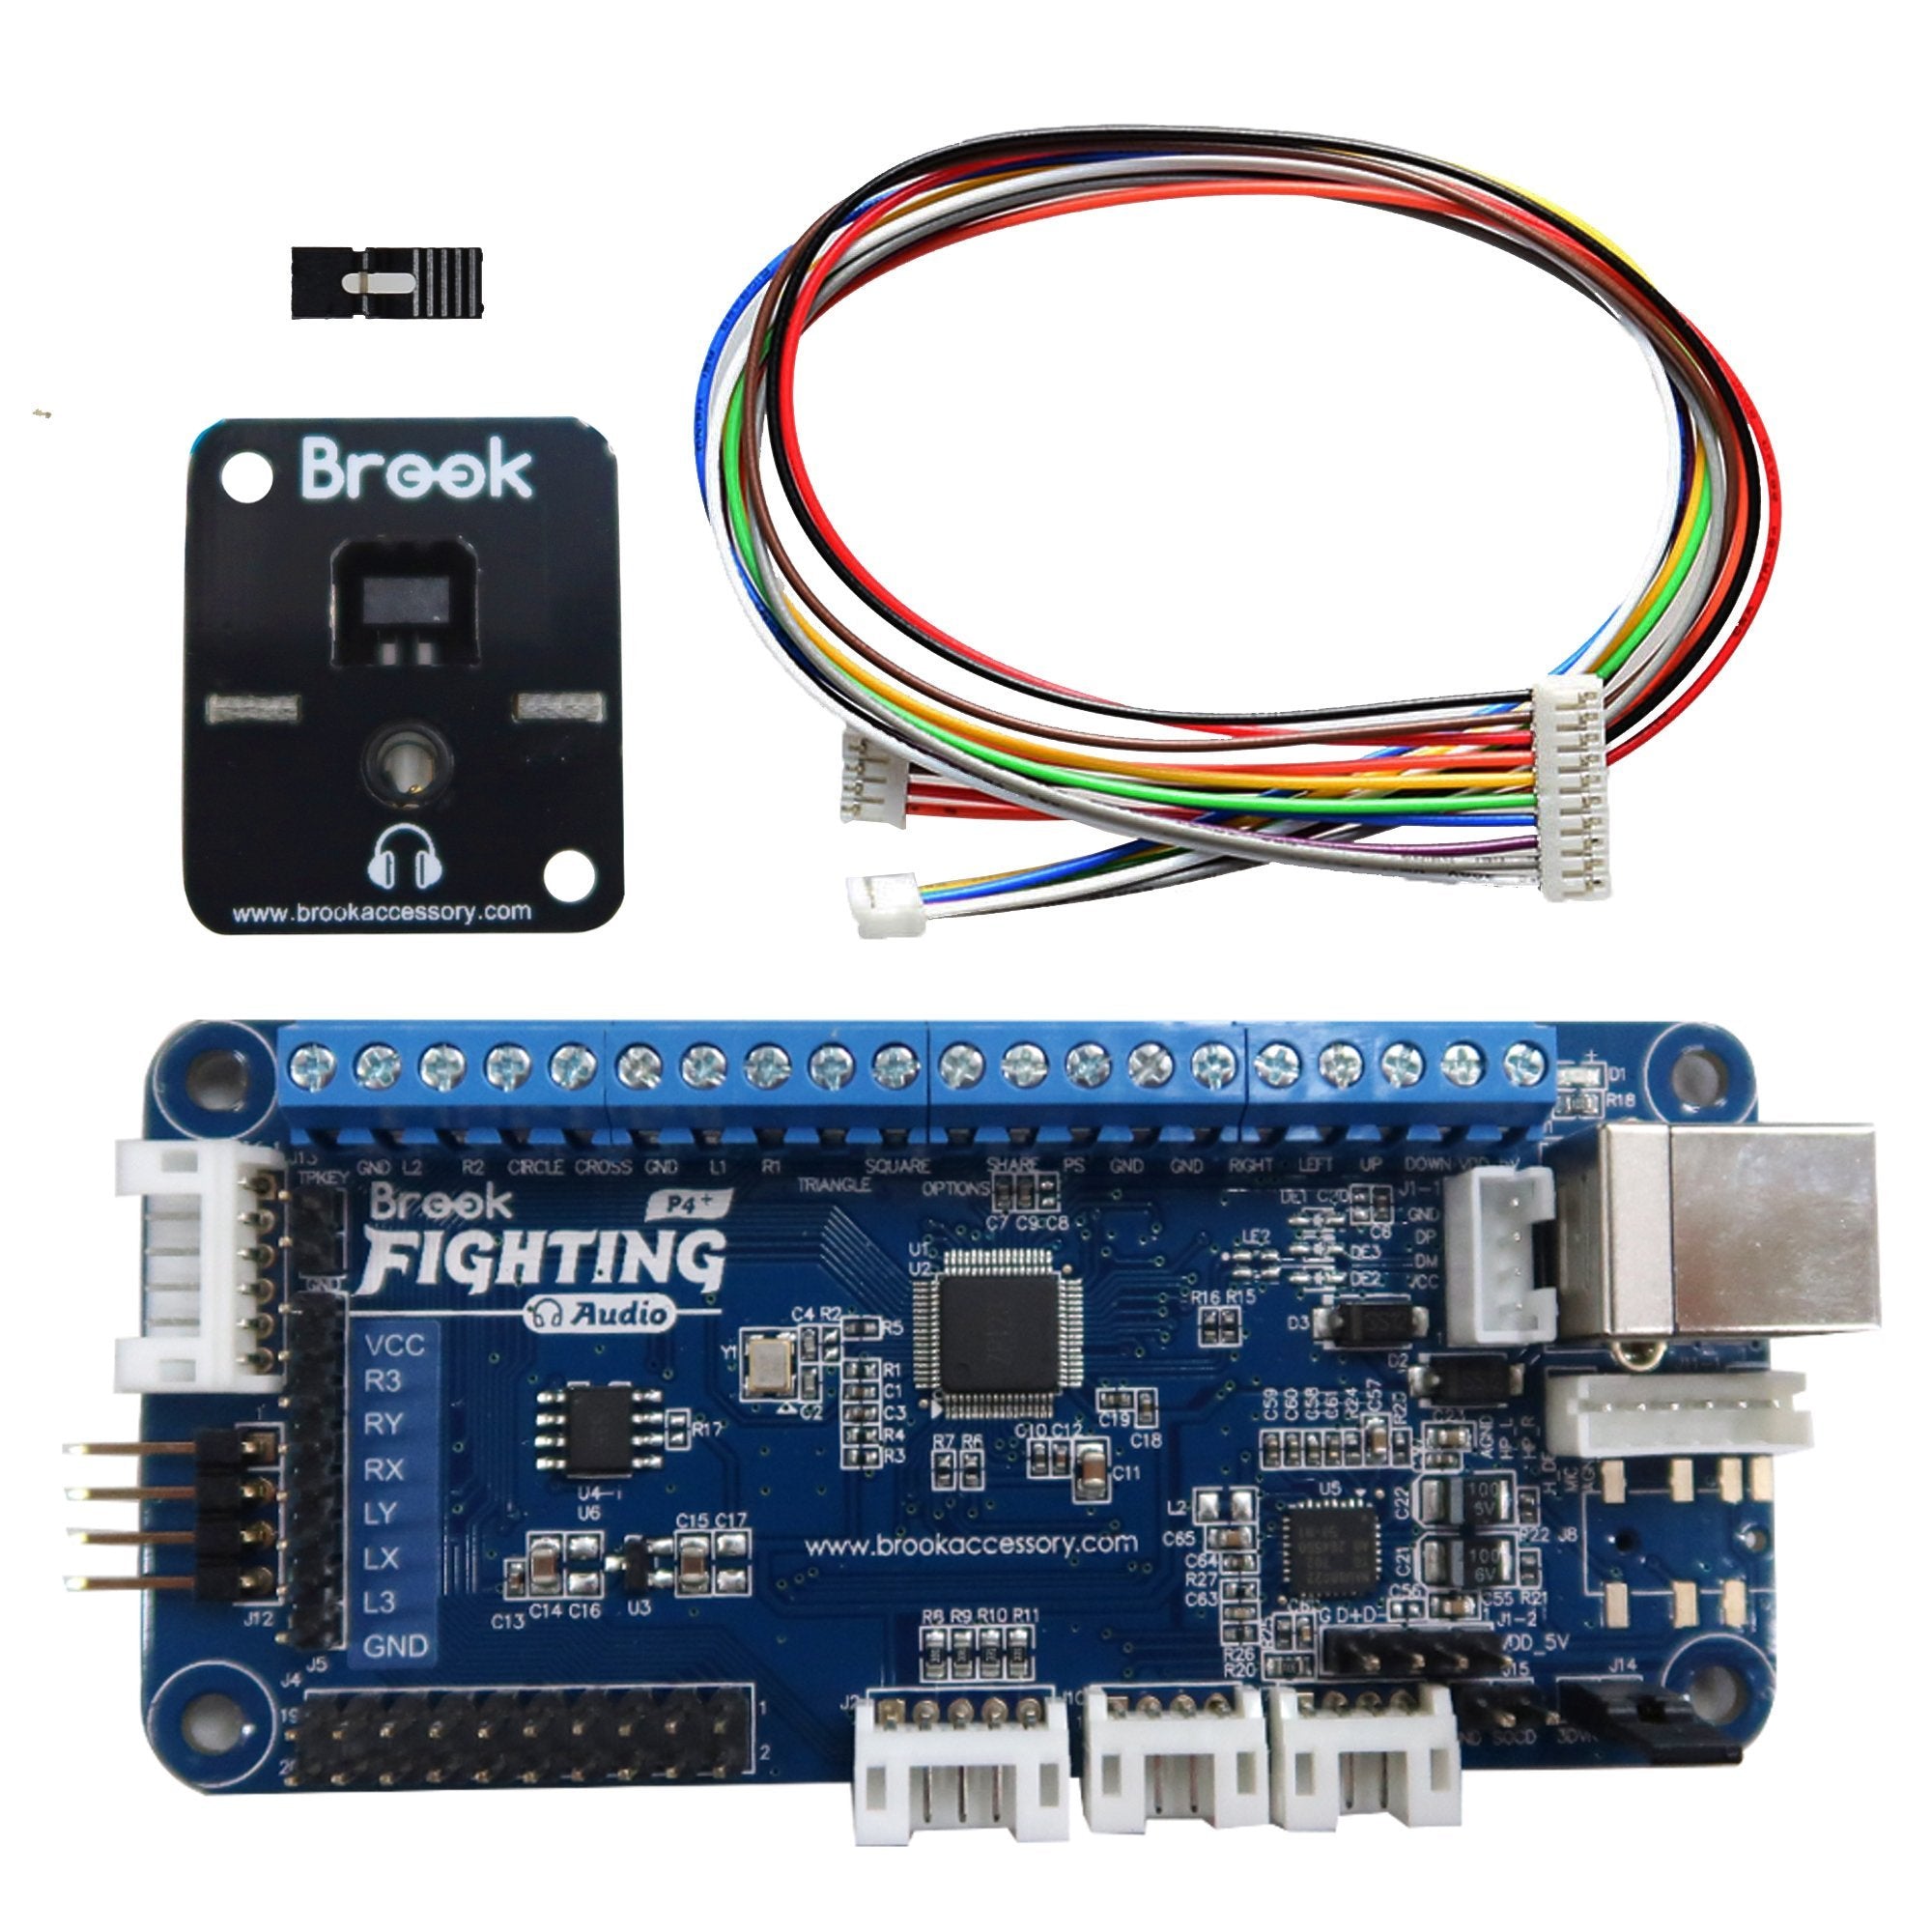 Gaming-Brook PS4+ Audio Fighting Board (MM00005787)